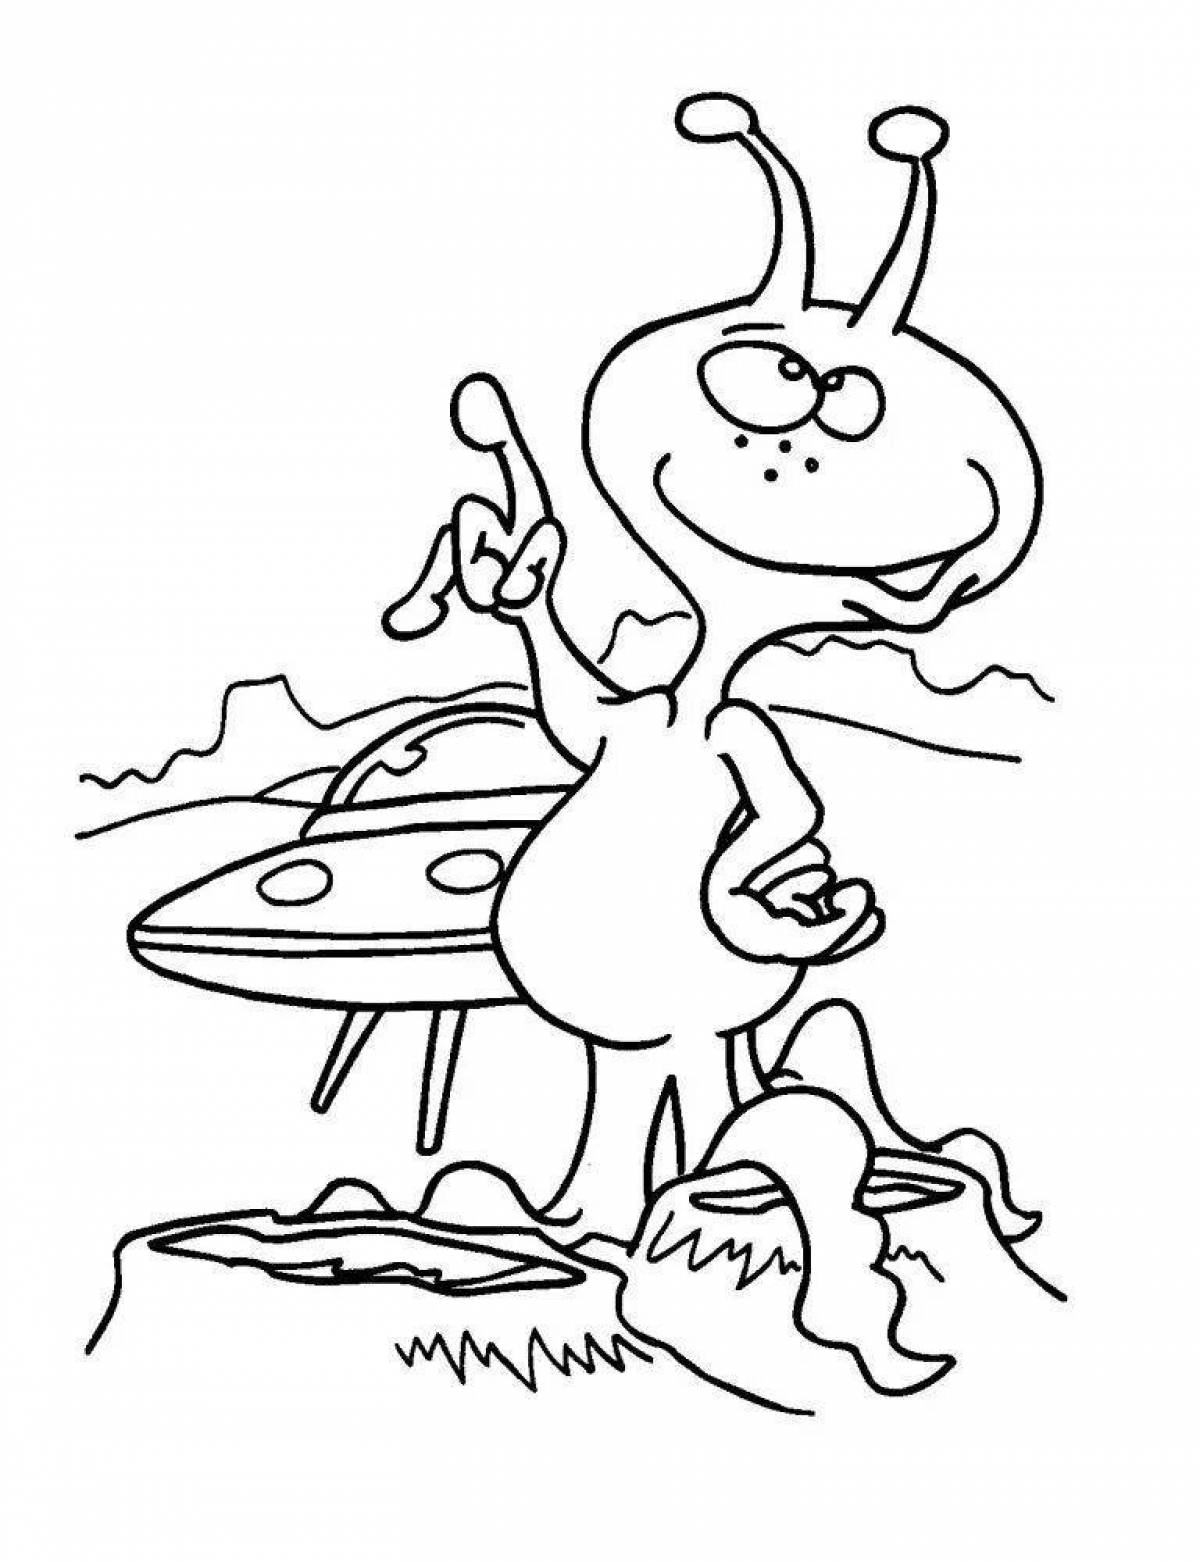 Fun coloring pages aliens for kids